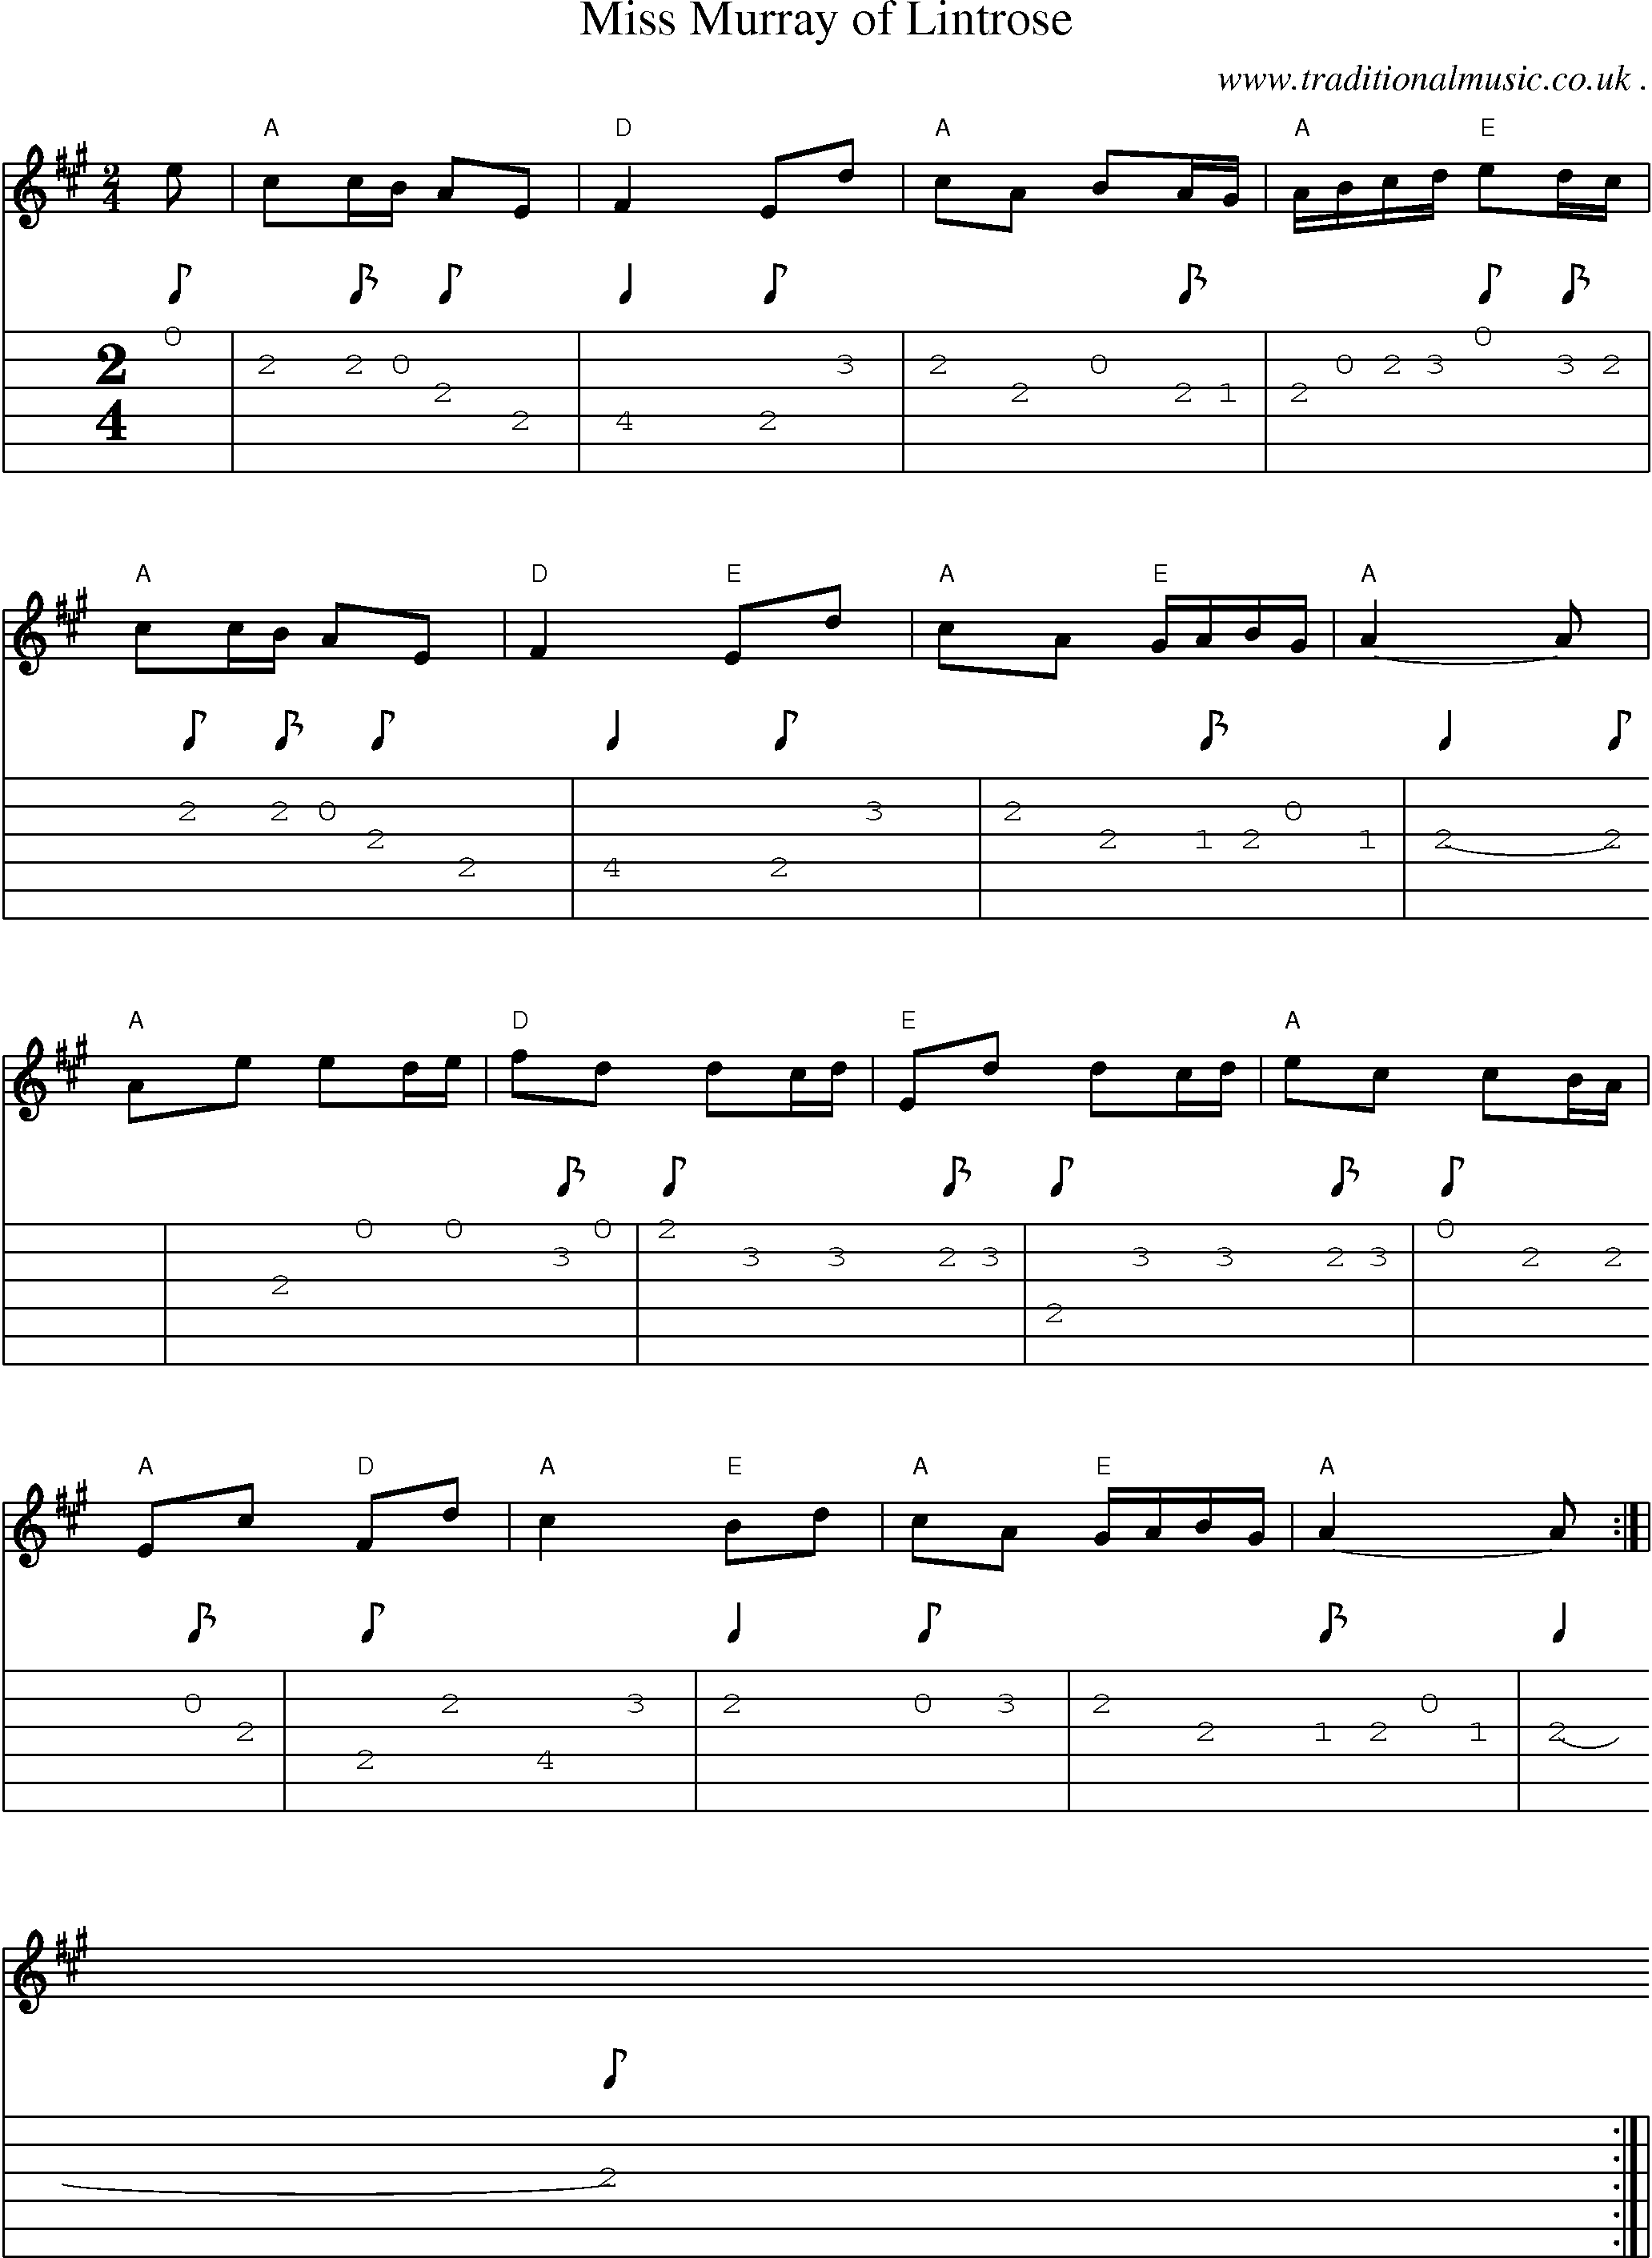 Sheet-music  score, Chords and Guitar Tabs for Miss Murray Of Lintrose